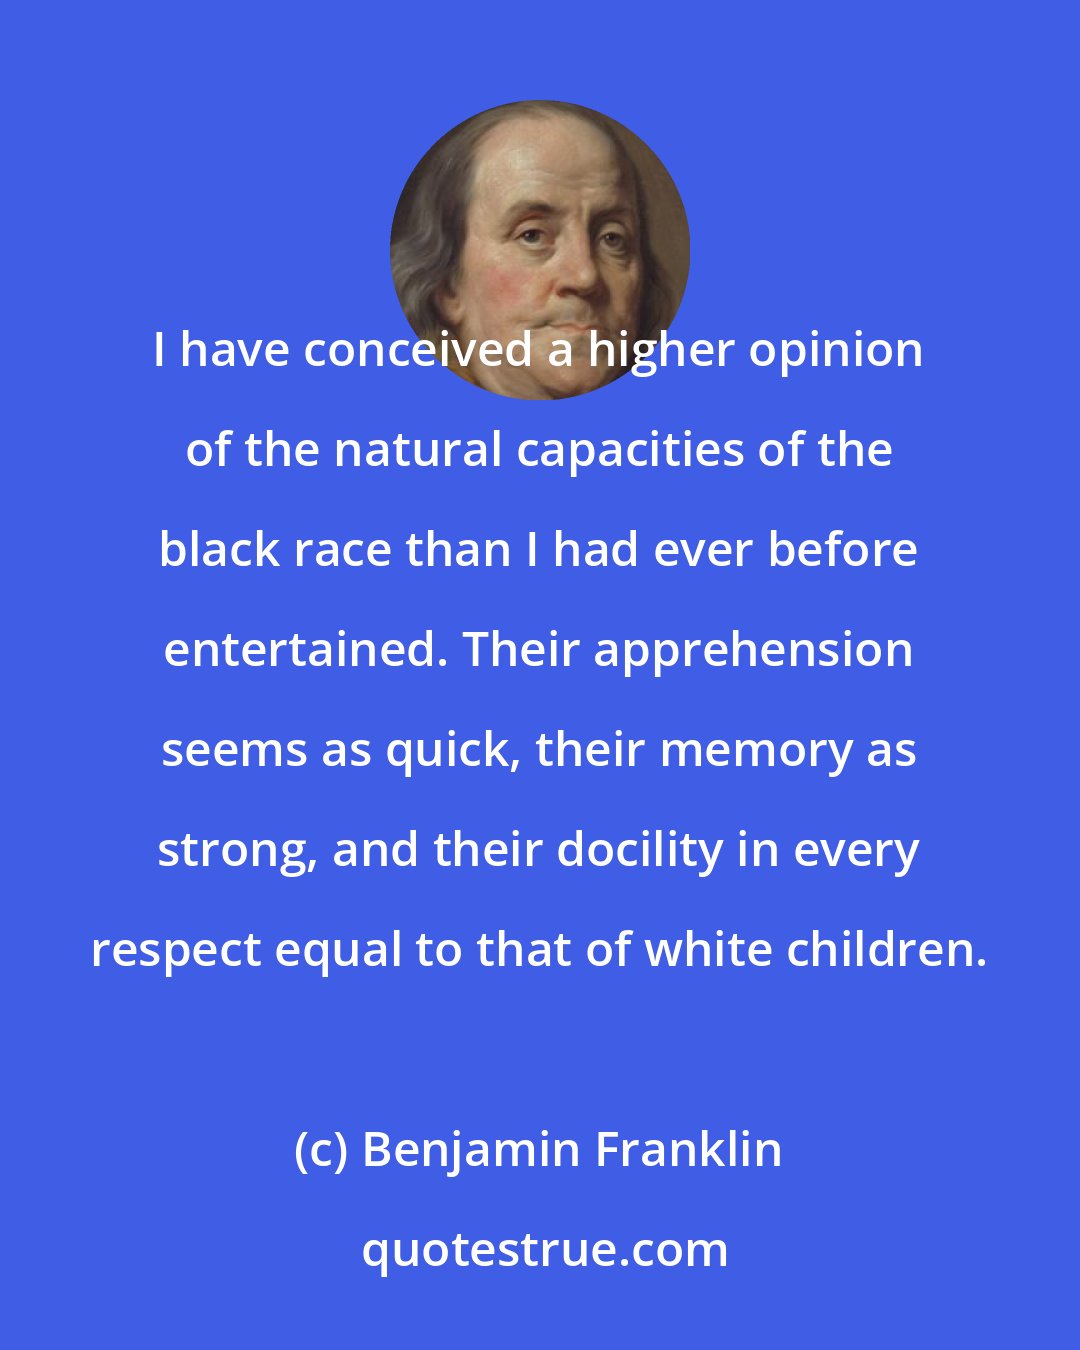 Benjamin Franklin: I have conceived a higher opinion of the natural capacities of the black race than I had ever before entertained. Their apprehension seems as quick, their memory as strong, and their docility in every respect equal to that of white children.